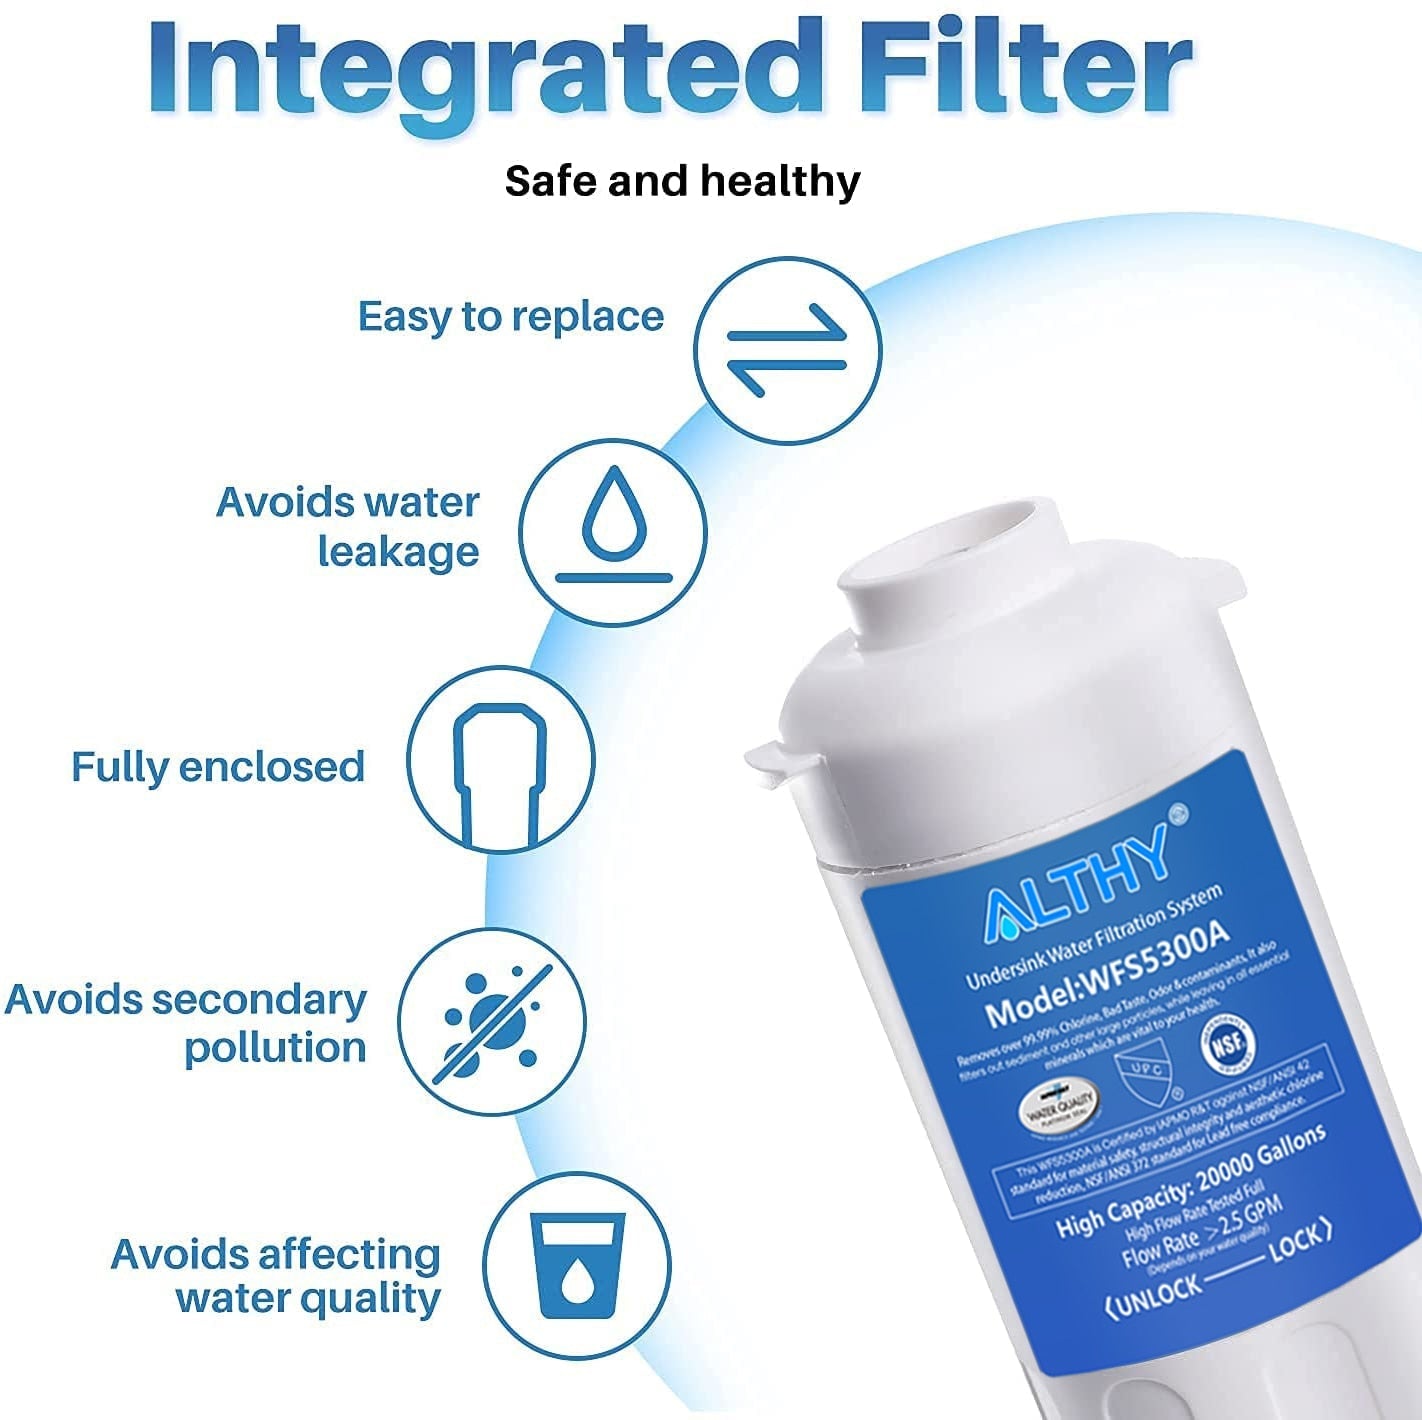 ALTHY Under Sink Drinking Water Filter Purifier -NSF/ANSI Certified Direct Connect Under Counter Drink Water Filtration System